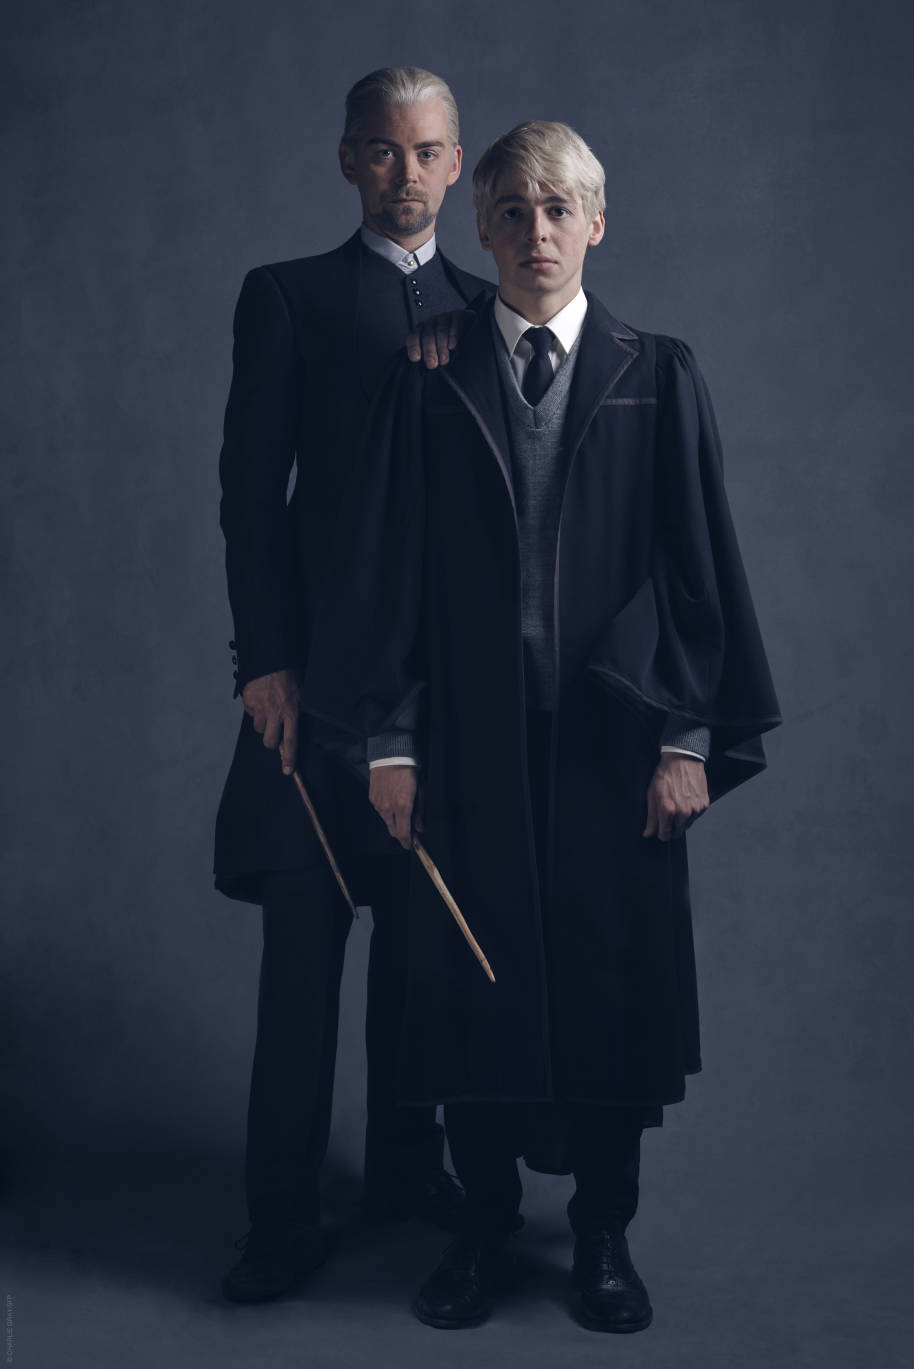 PMARCHIVE-L-R, Alex Price as Draco Malfoy and Anthony Boyle as Scorpius Malfoy. 5erSUHrL1mei8oSEcmS82M-b1